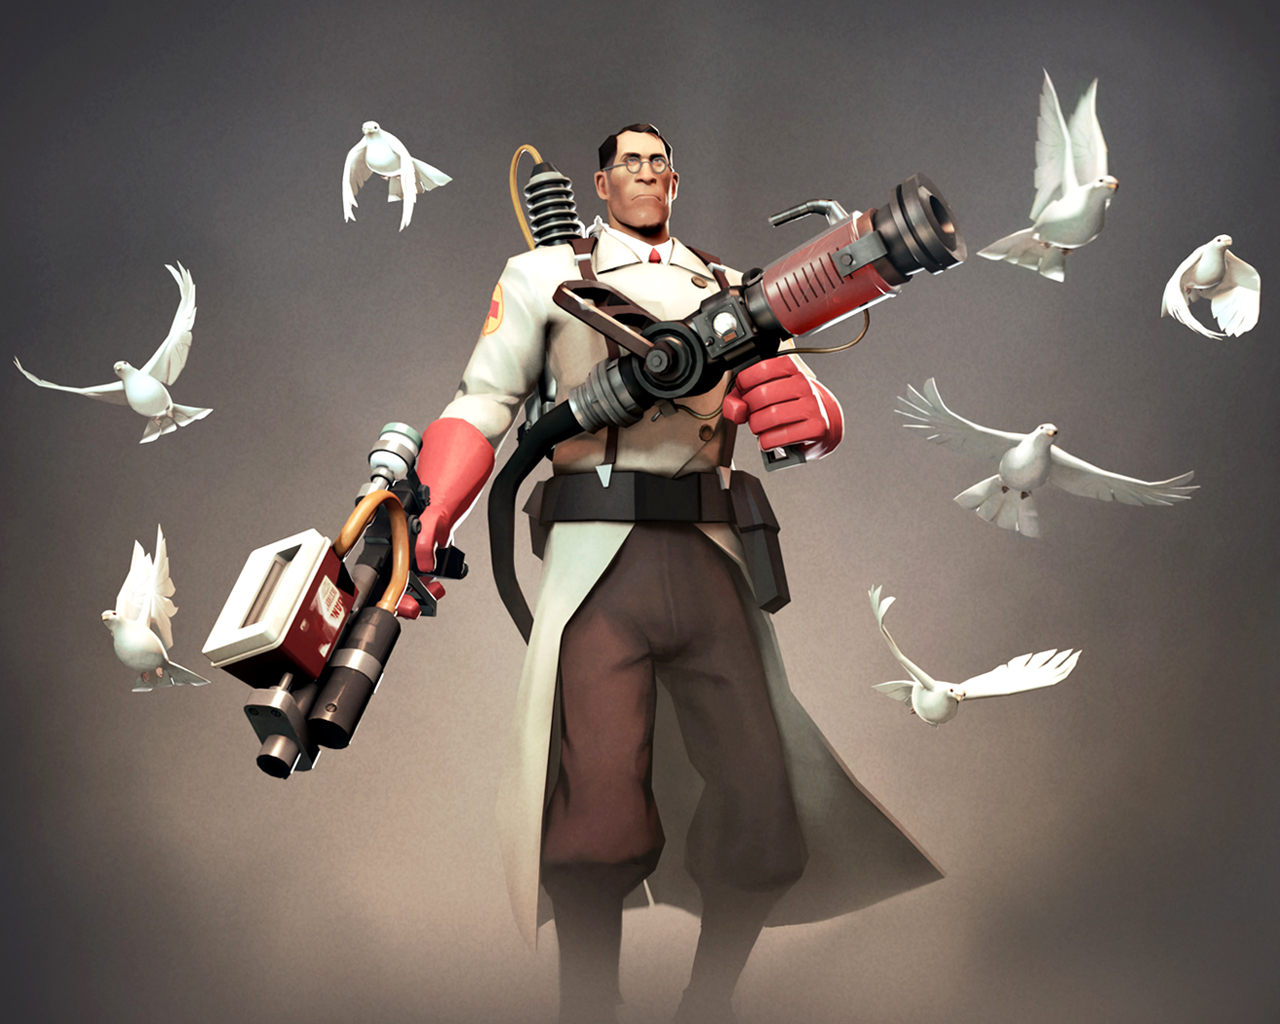 File:1280x1024 medic.jpg - Official TF2 Wiki | Official Team Fortress Wiki